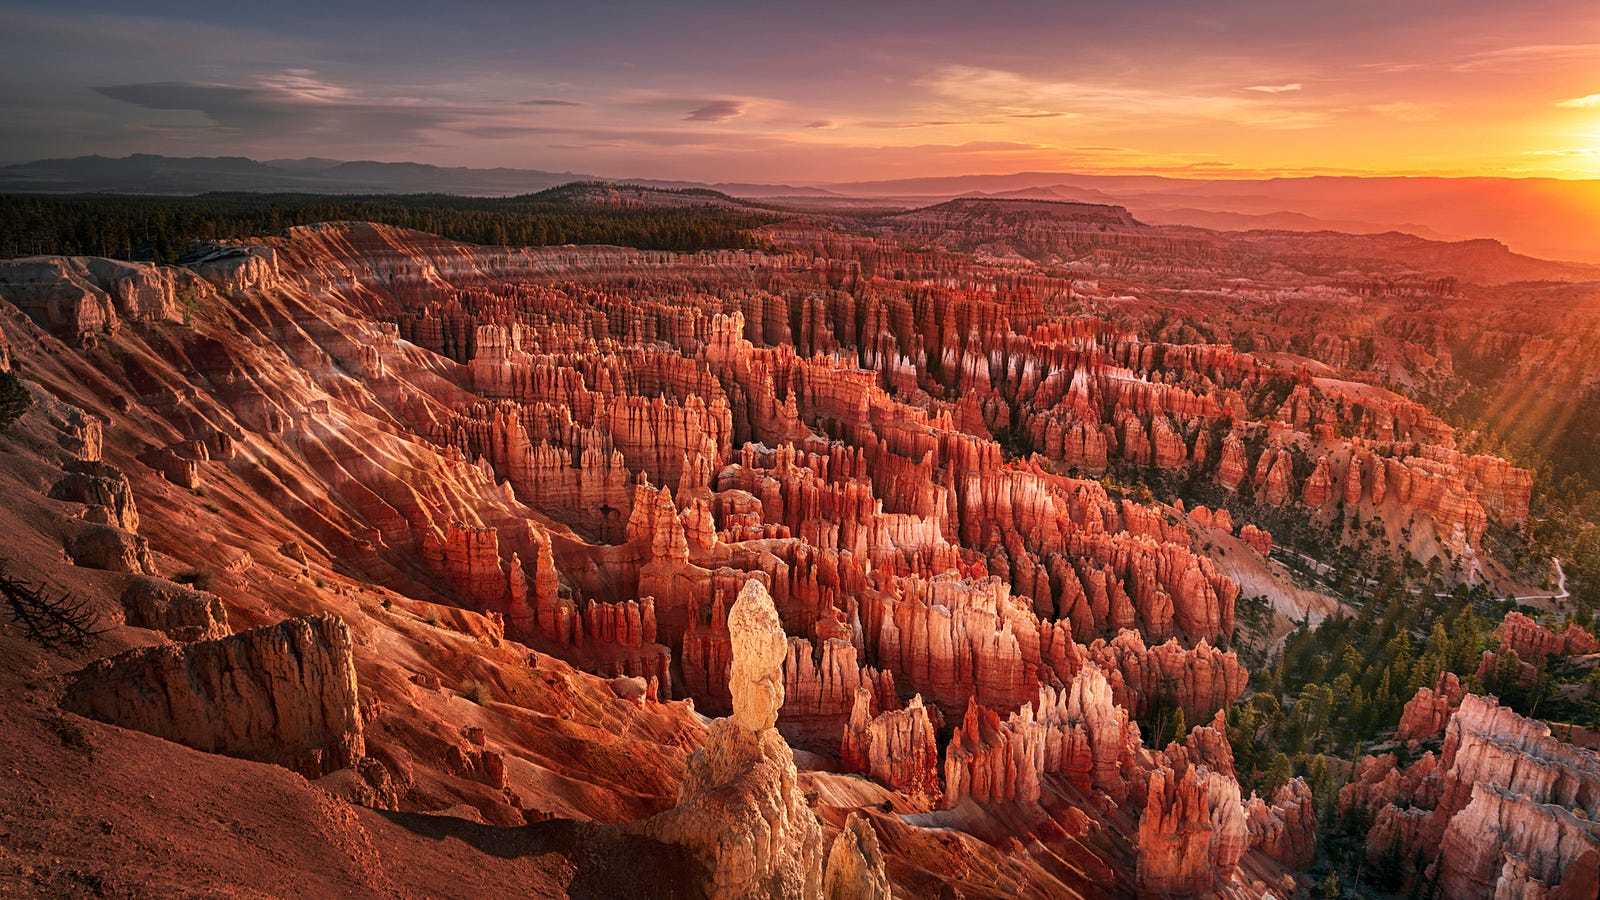 Morning sunlight over the amphitheater at Bryce Canyon National Park, Utah